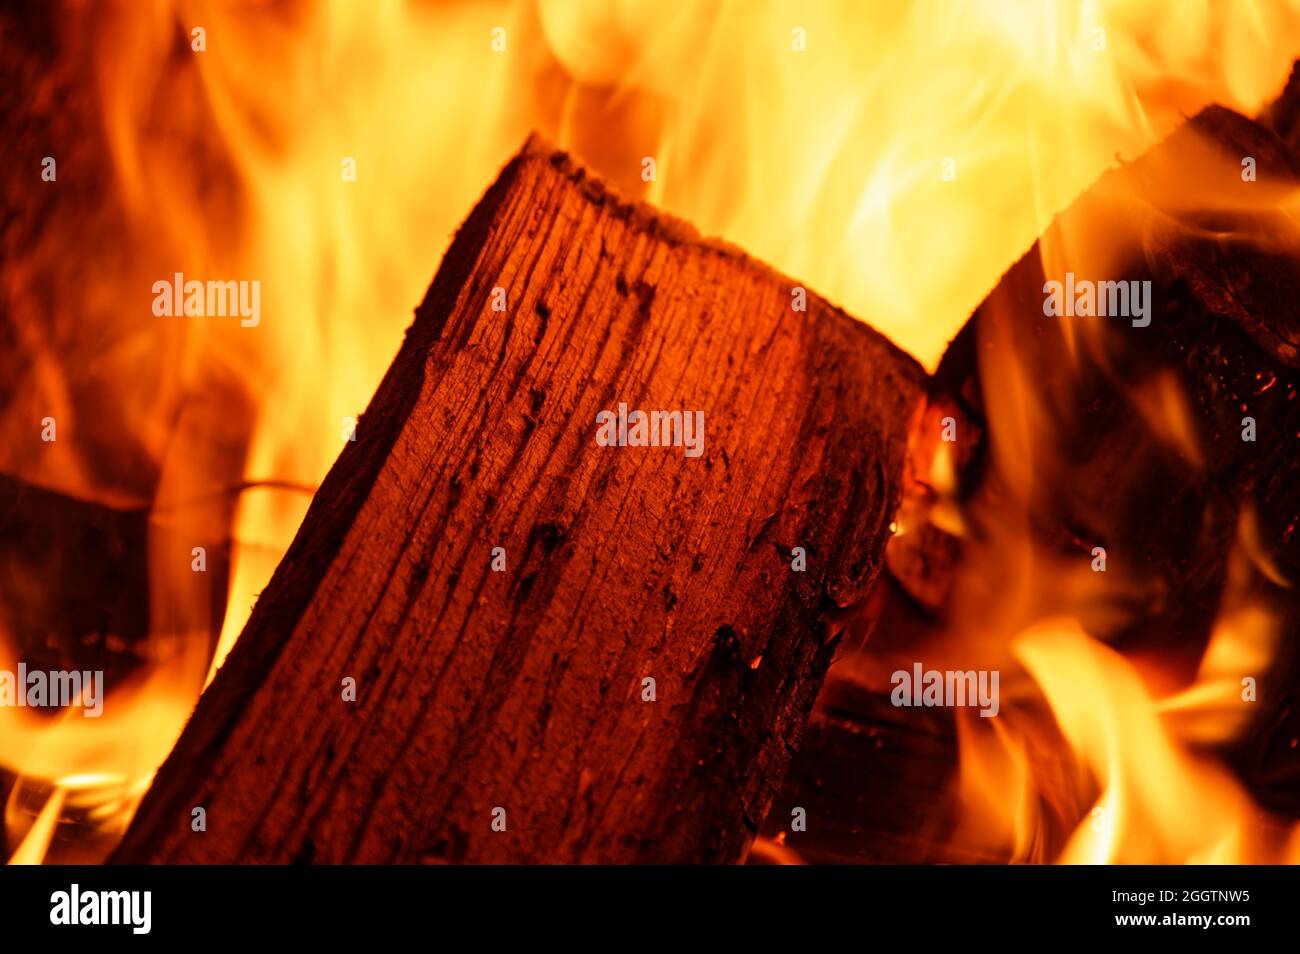 Wood is burning well in an open fireplace Stock Photo